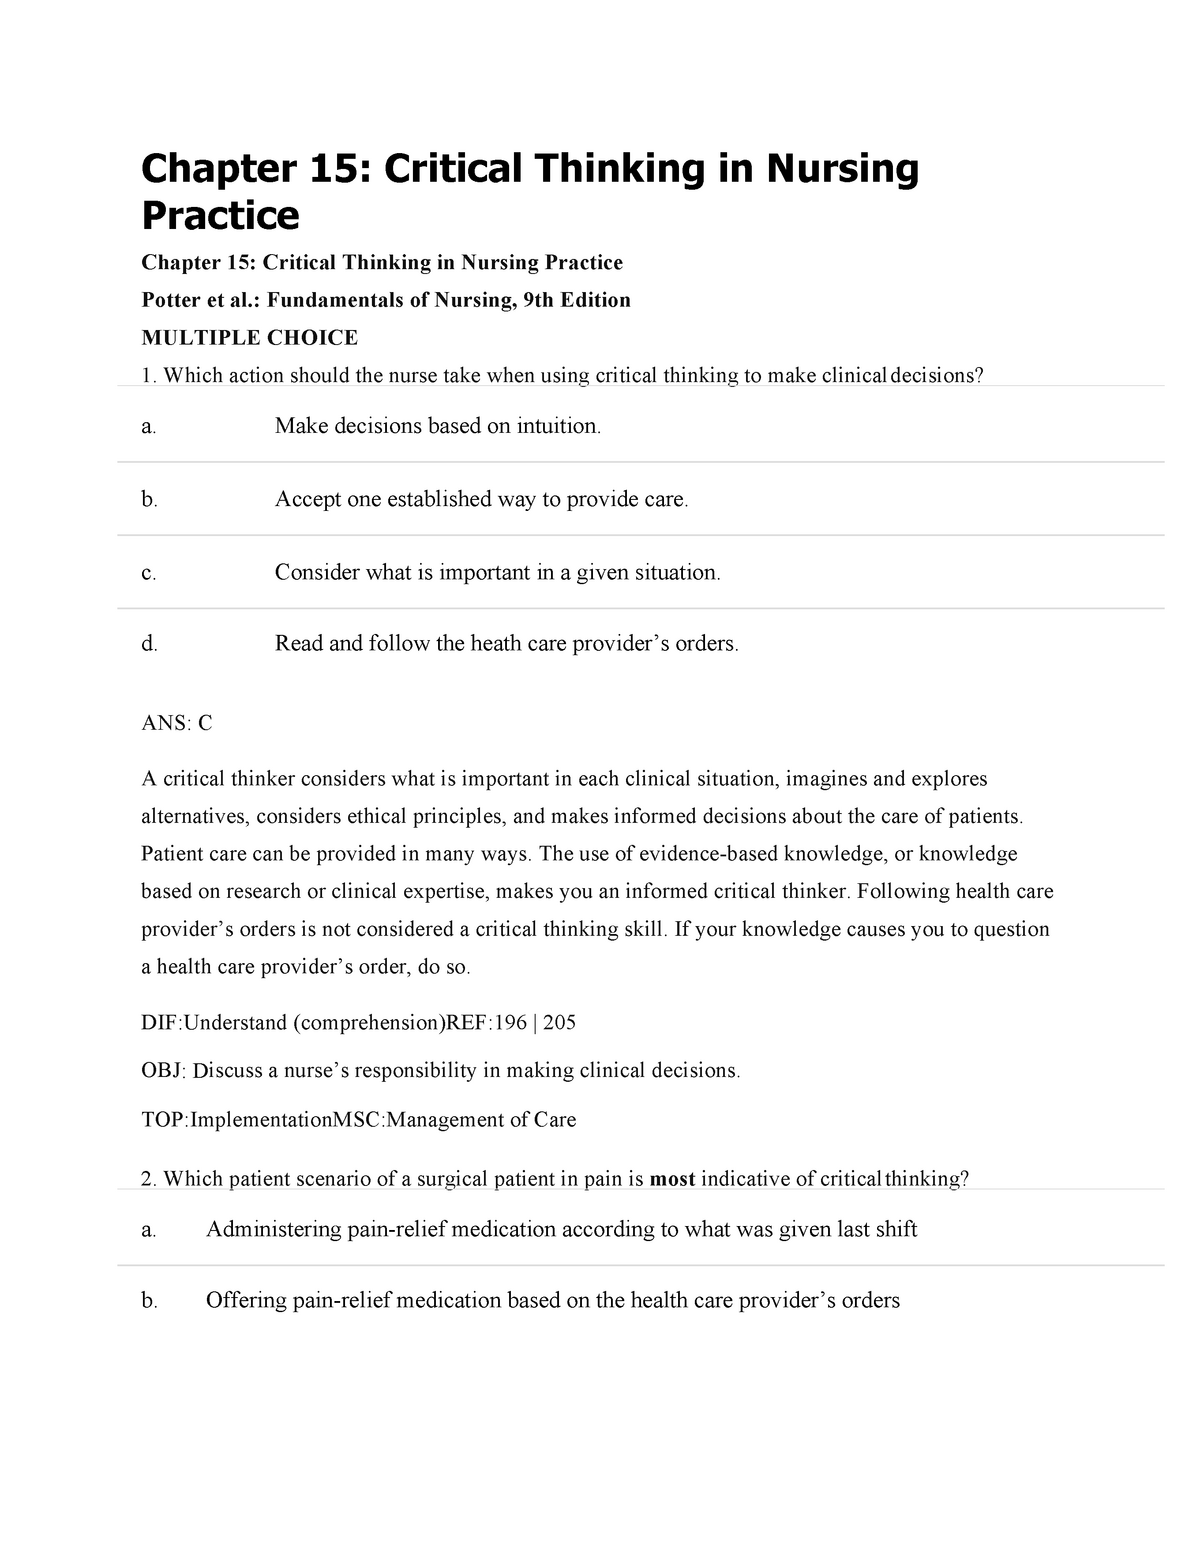 chapter 15 critical thinking in nursing practice quizlet